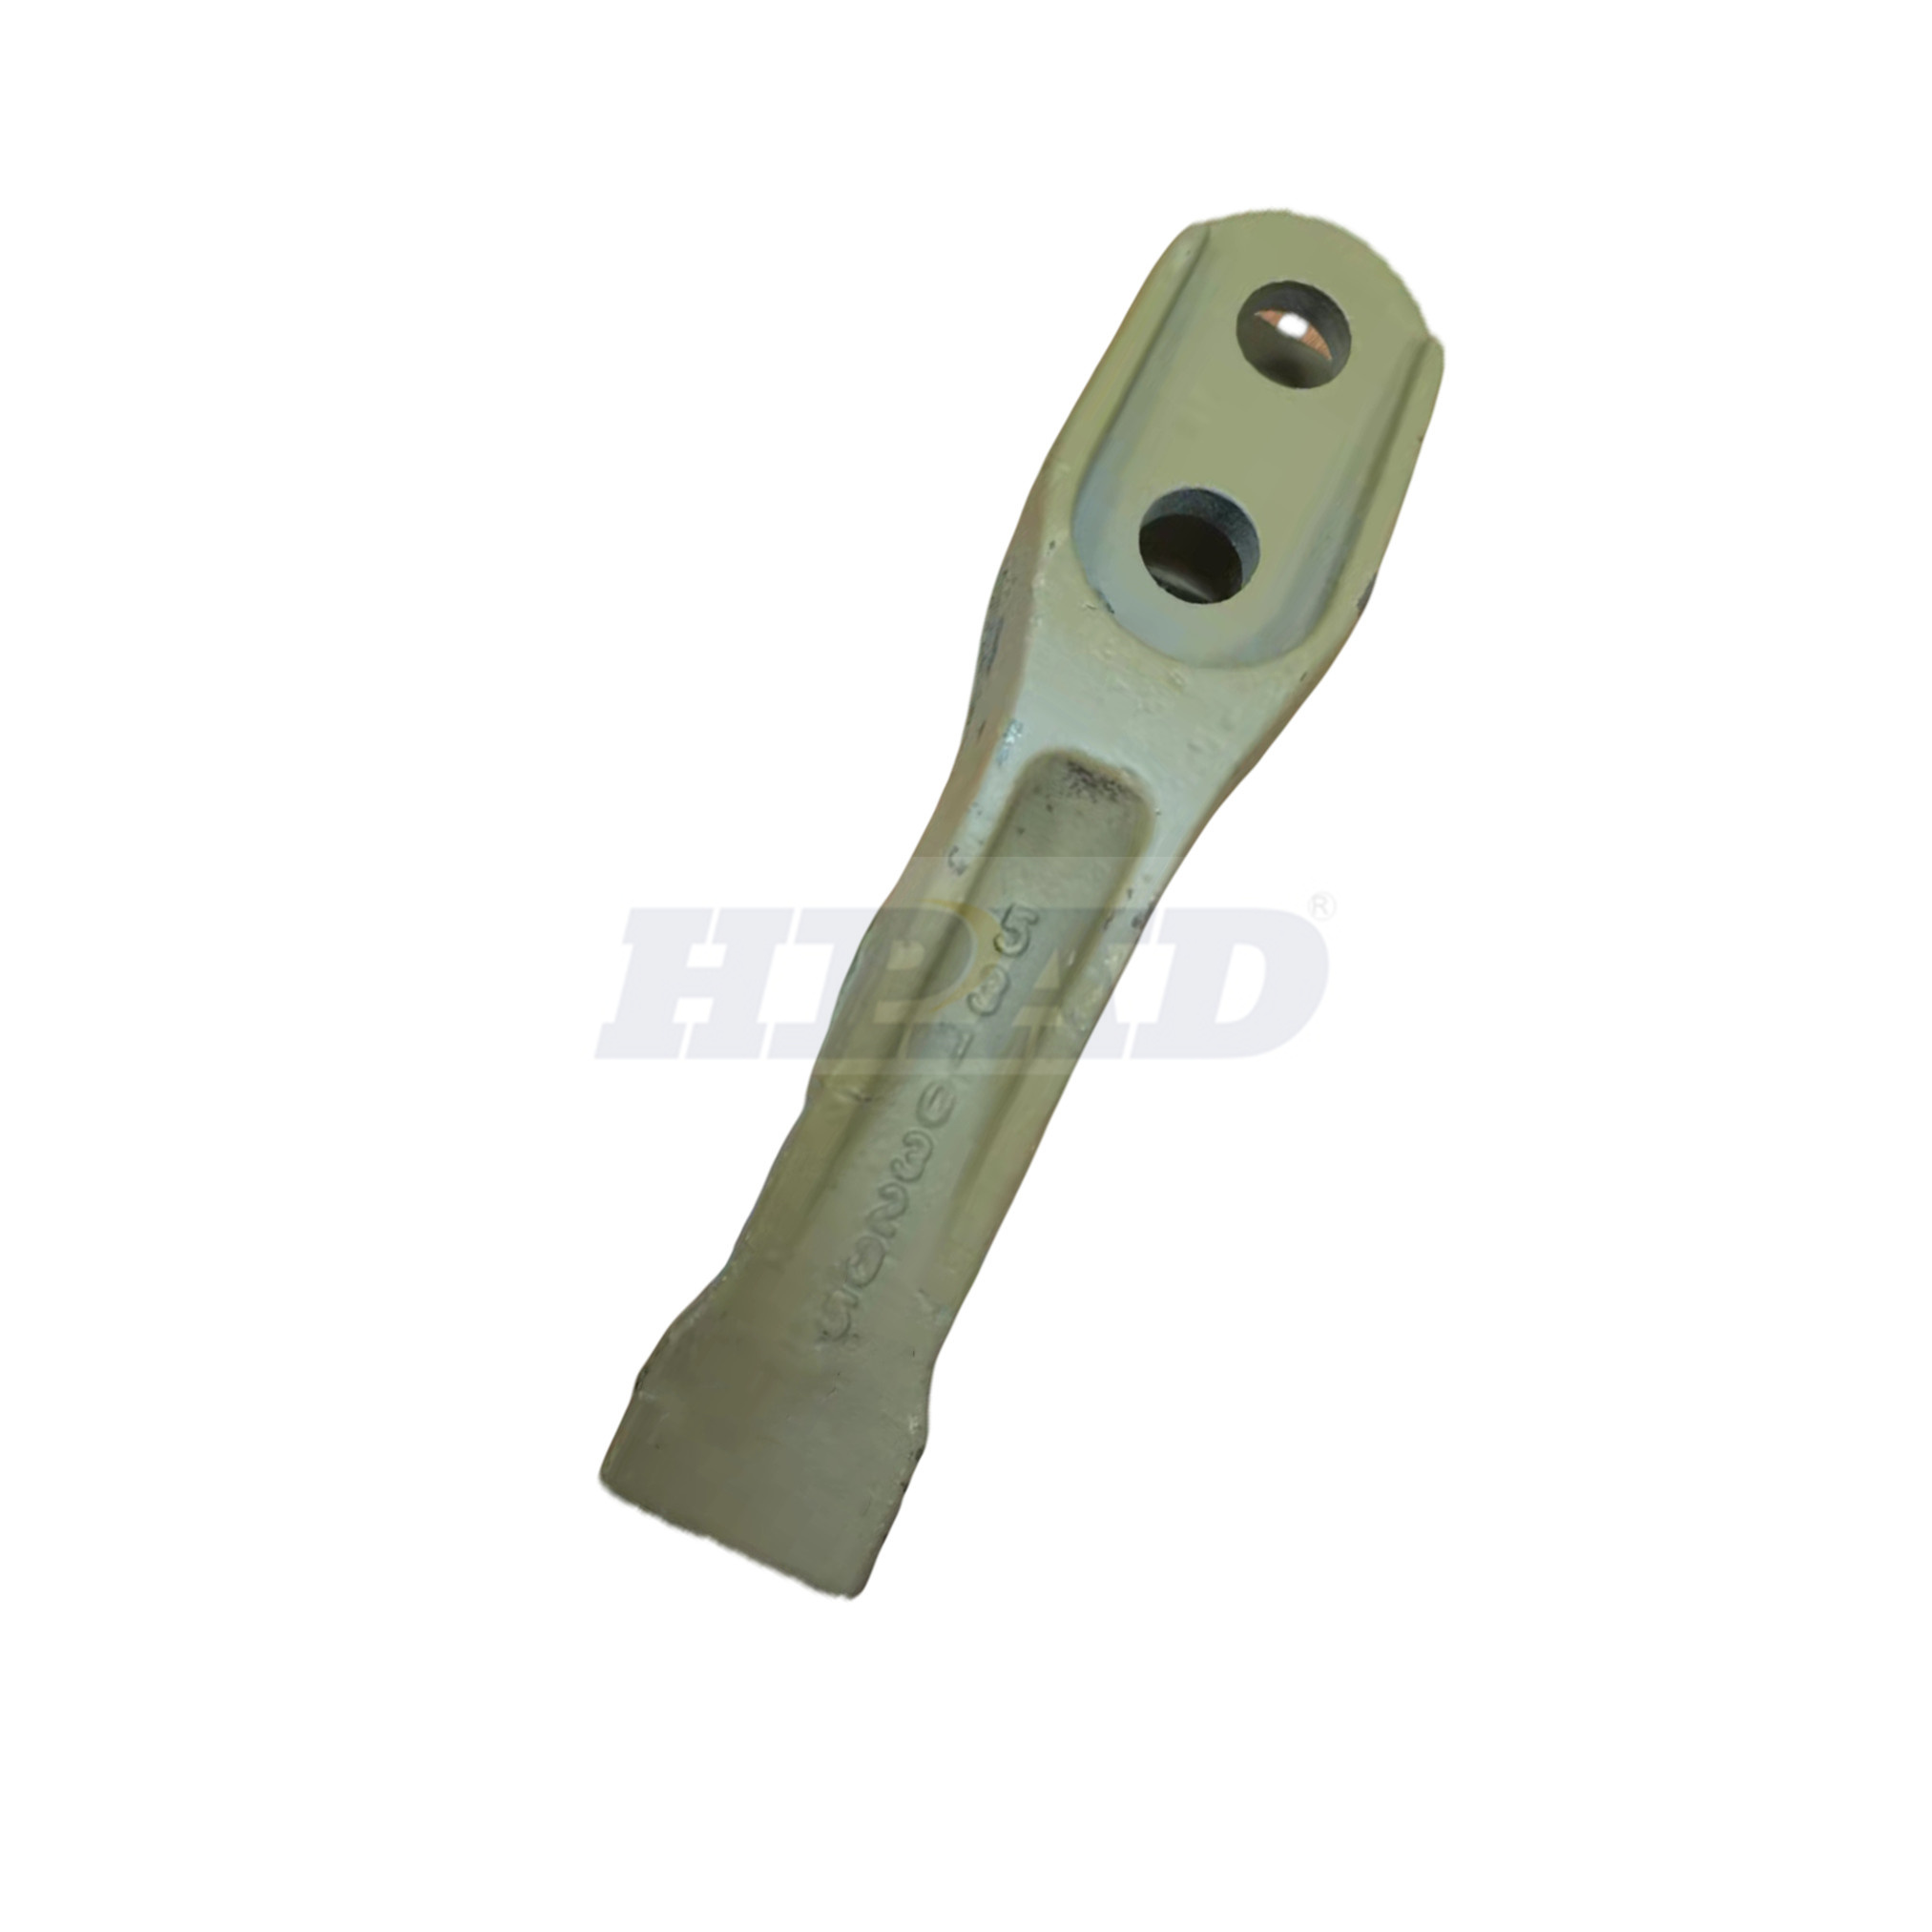 Loader Wear Parts Unitooth 531-03205 for JCB Series